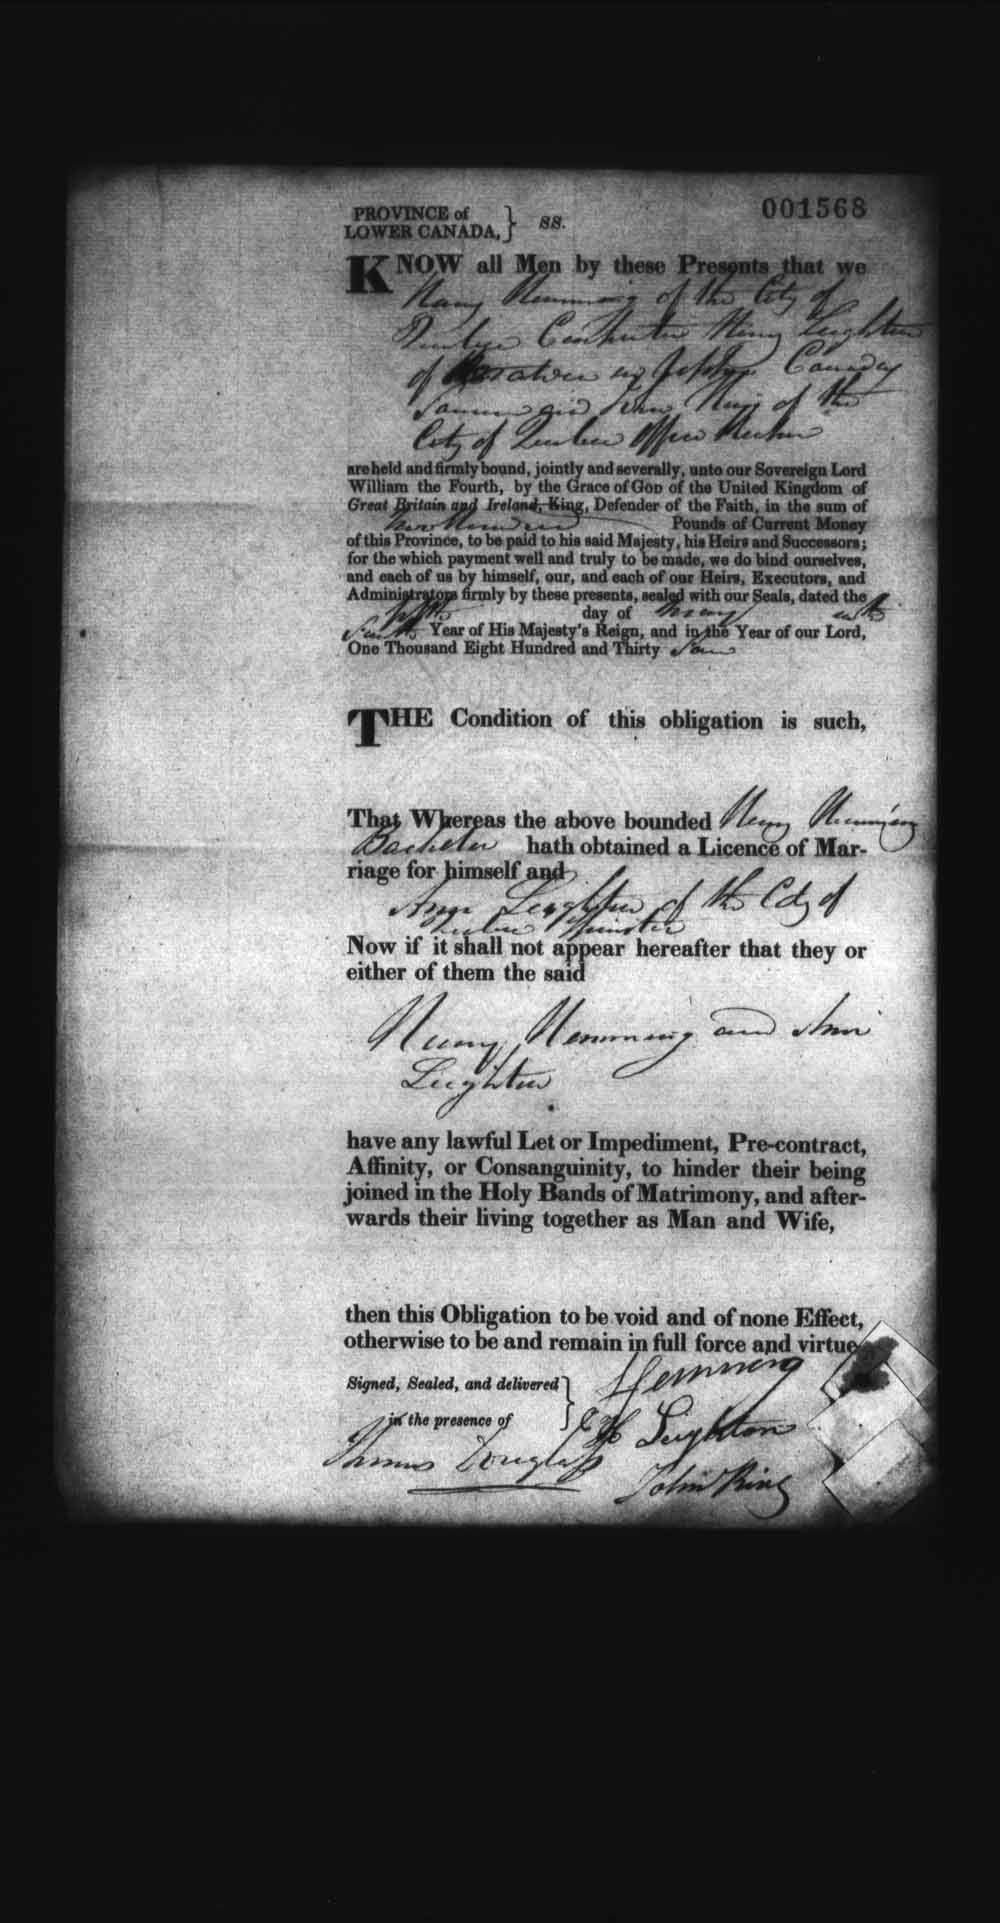 Digitized page of Upper and Lower Canada Marriage Bonds (1779-1865) for Image No.: e008237880